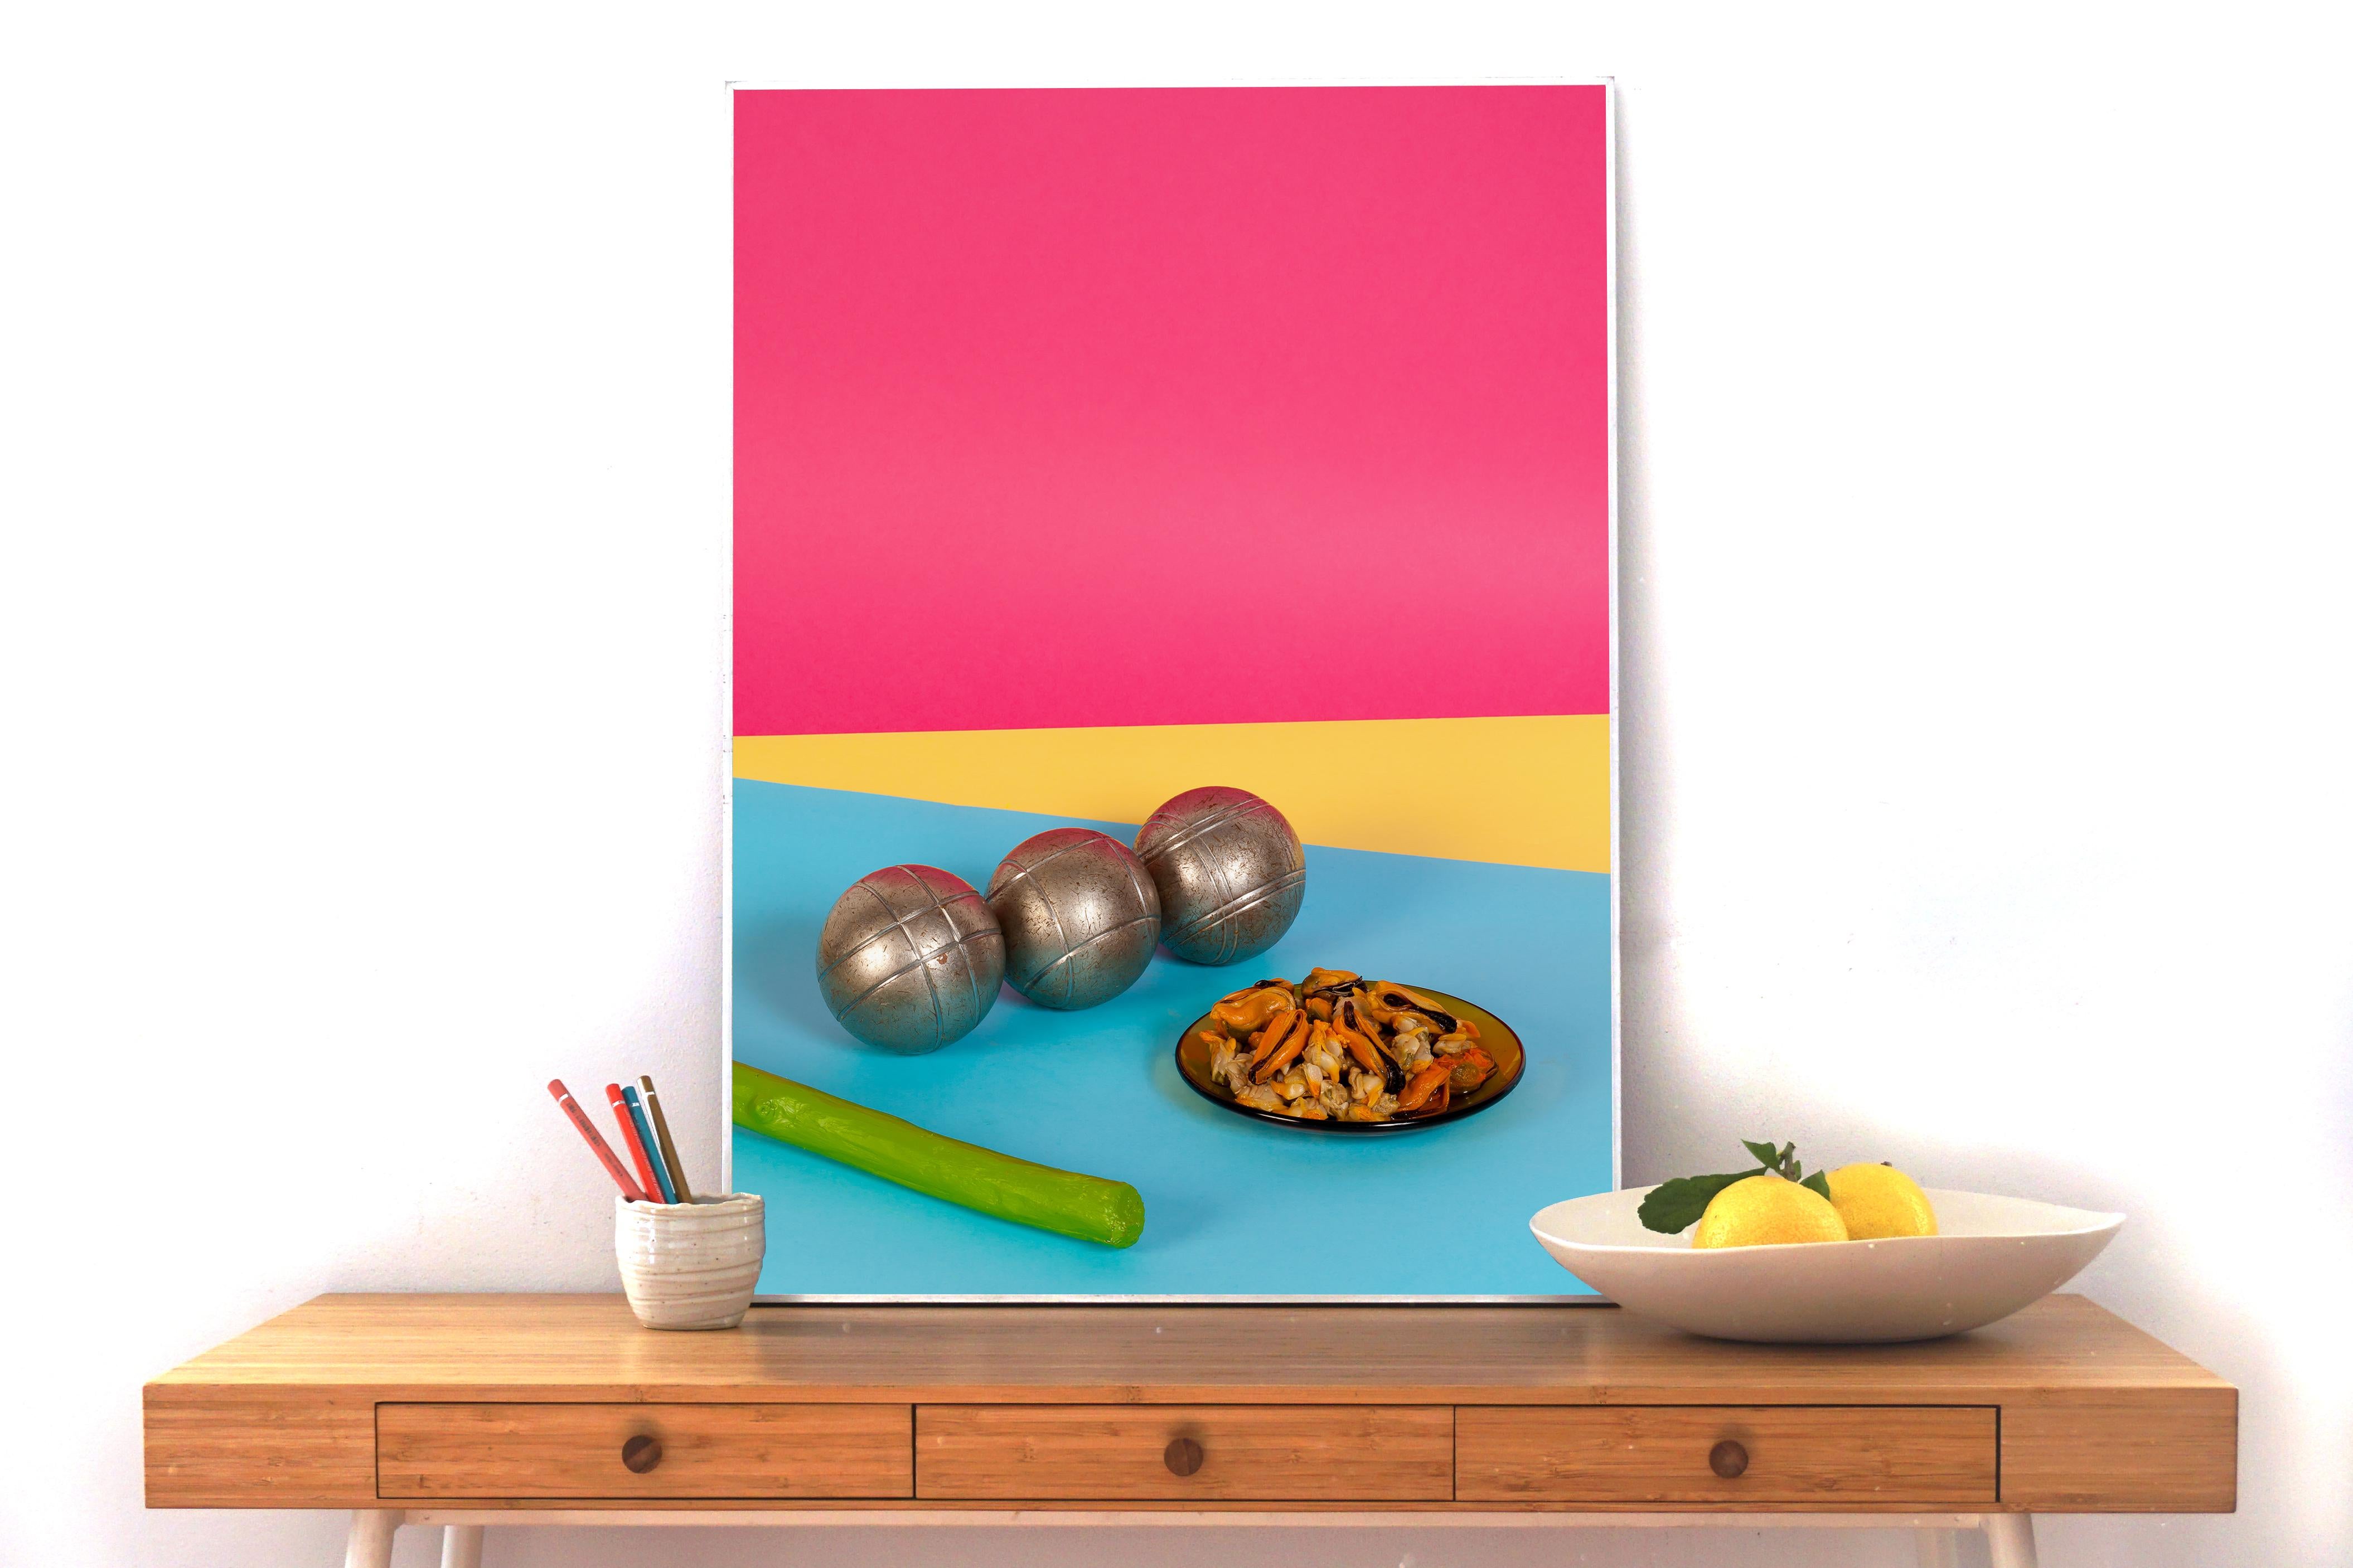 Still Life Conceptual Scene, Playful Seafood in Vivid Color, Blue, Yellow , Pink - Print by Ryan Rivadeneyra